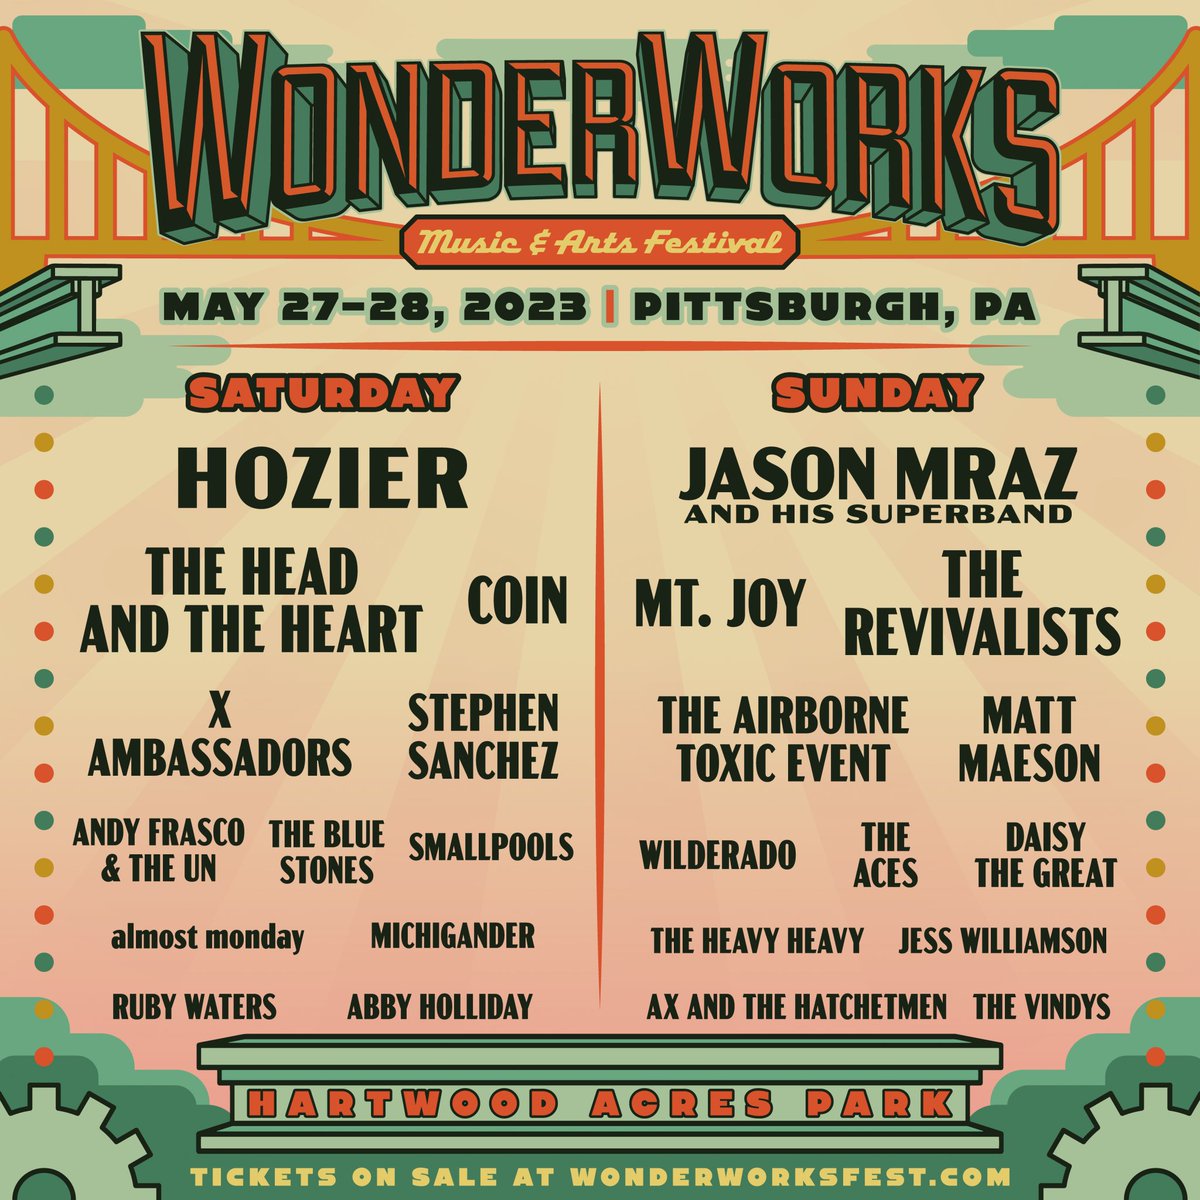 Grateful to announce that No Cover Magazine will be doing media coverage of WonderWork's Music & Arts Festival in Pittsburgh, PA, this weekend.

Who's your favorite on this lineup? Who should I check out, before yelling out all of Jason Mraz' hits?